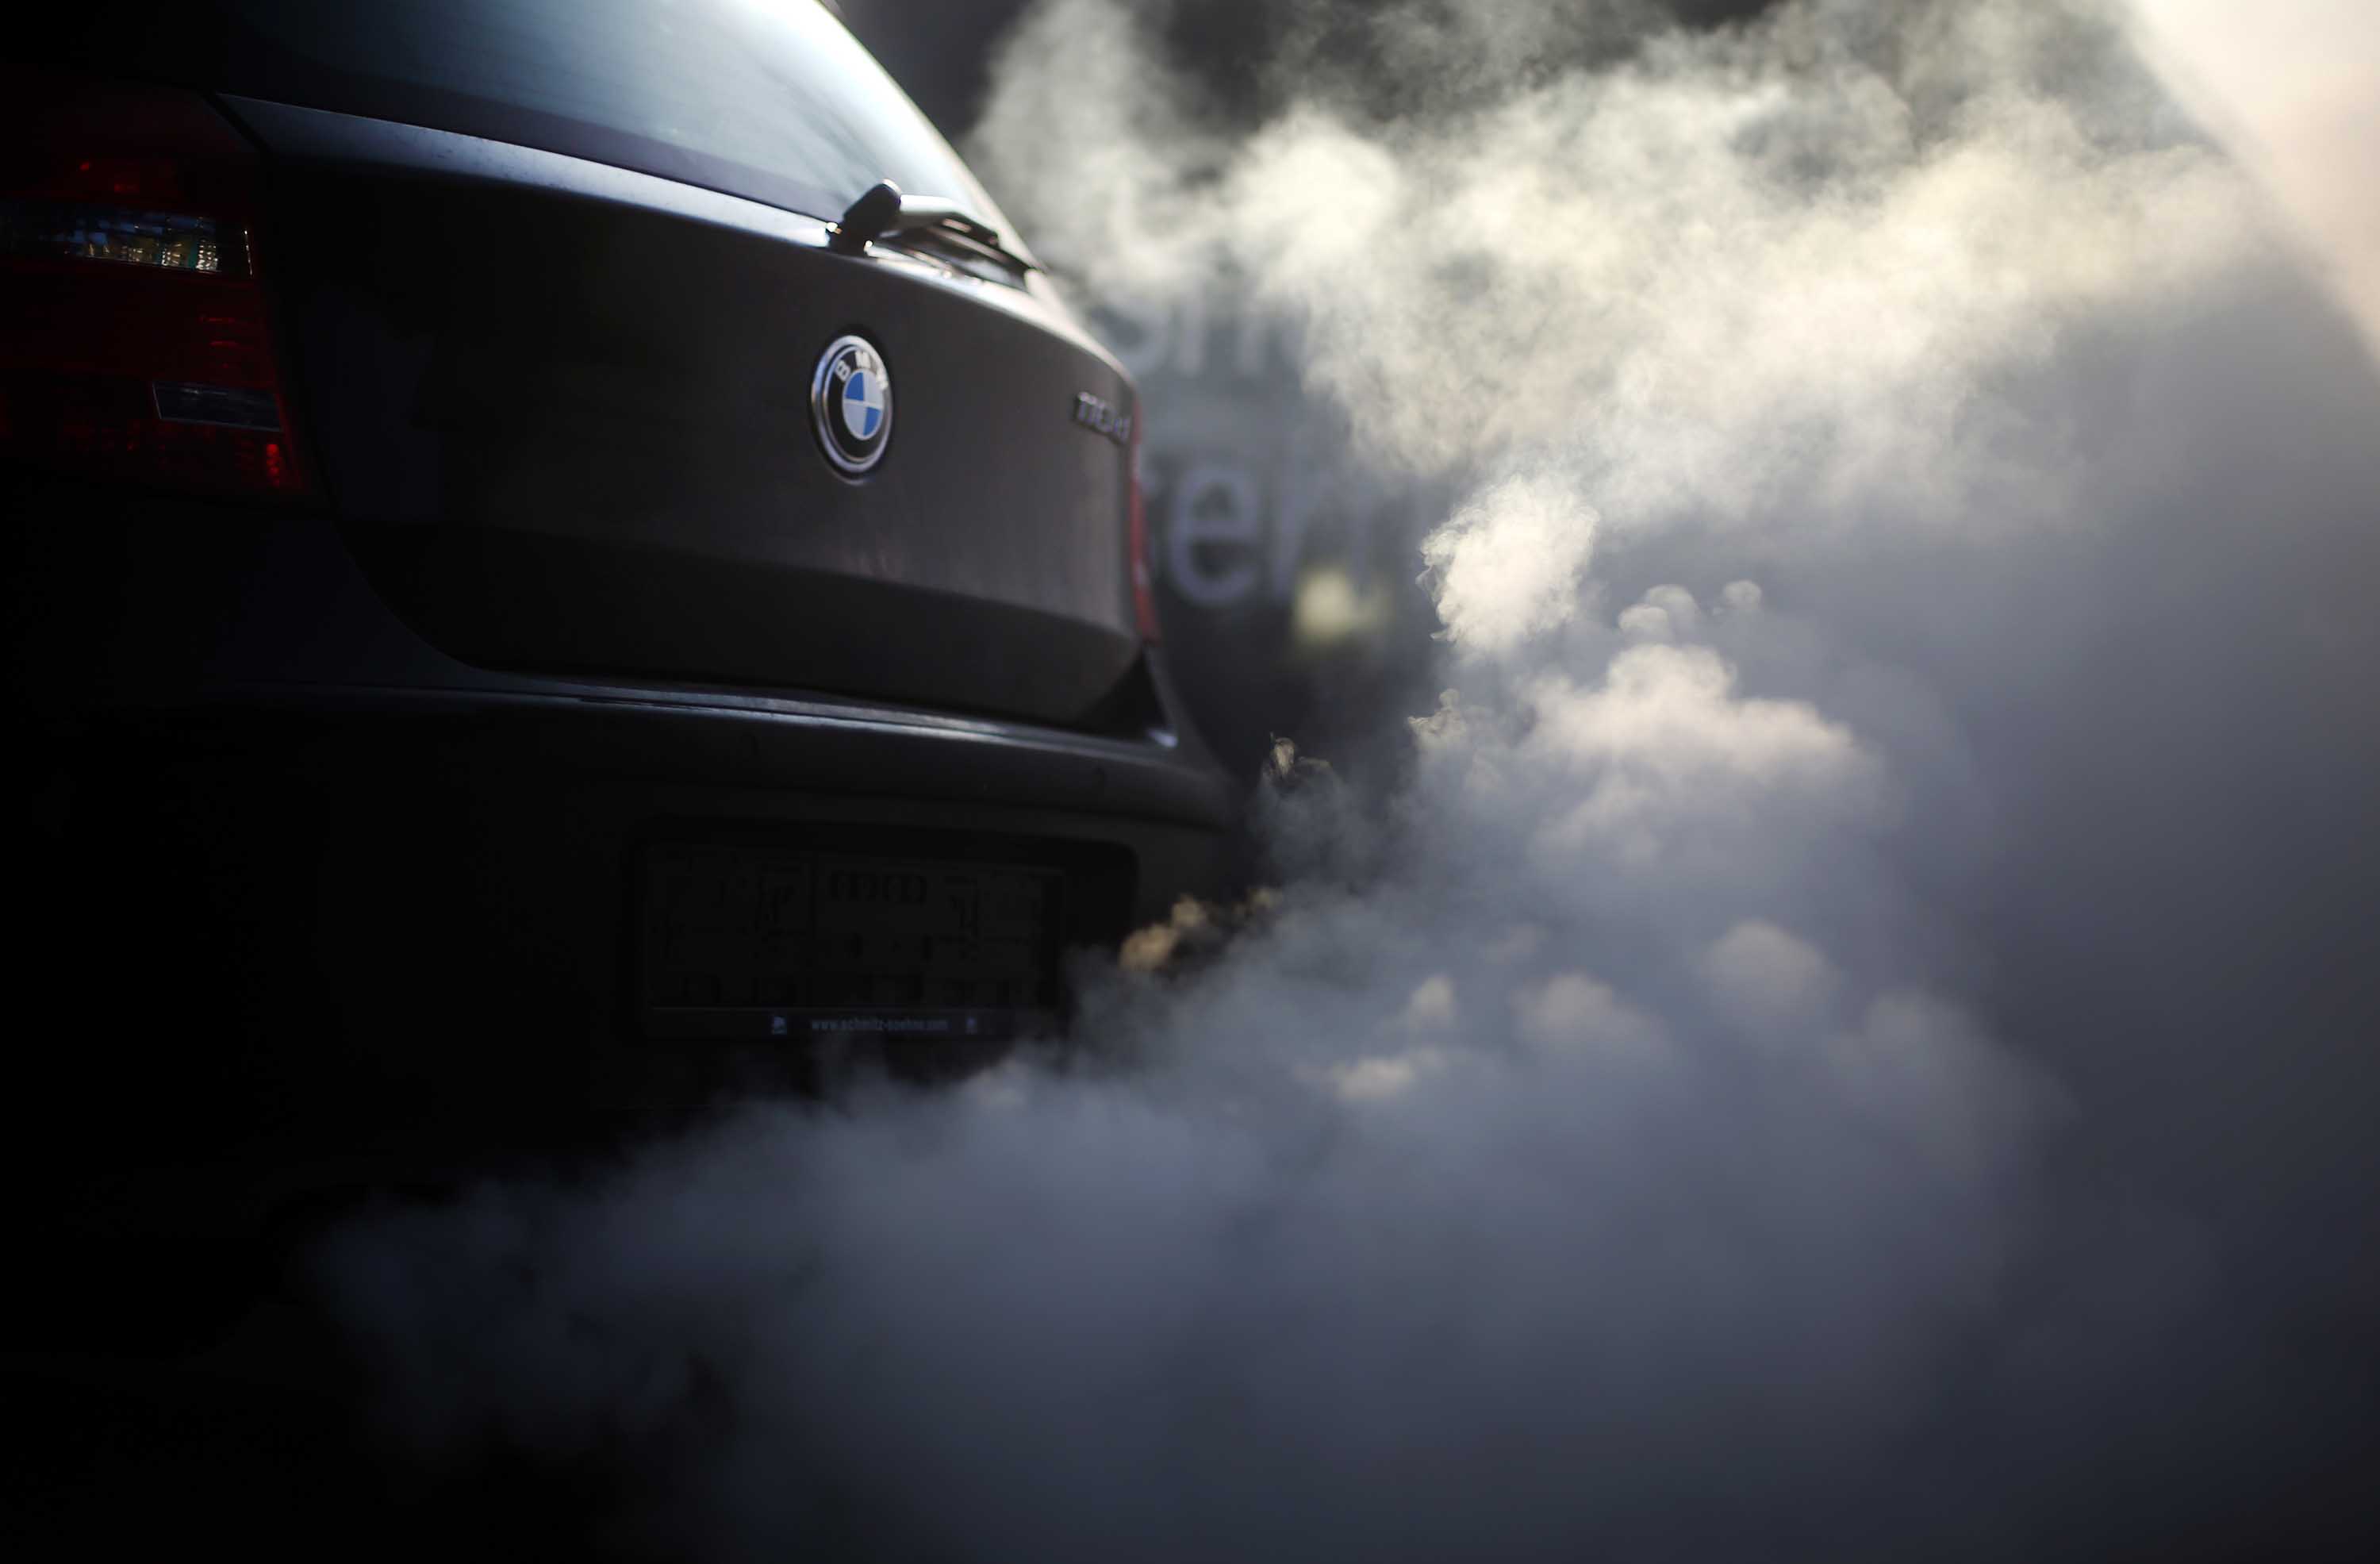 EU antitrust: Volkswagen, BMW and Daimler accused of emissions